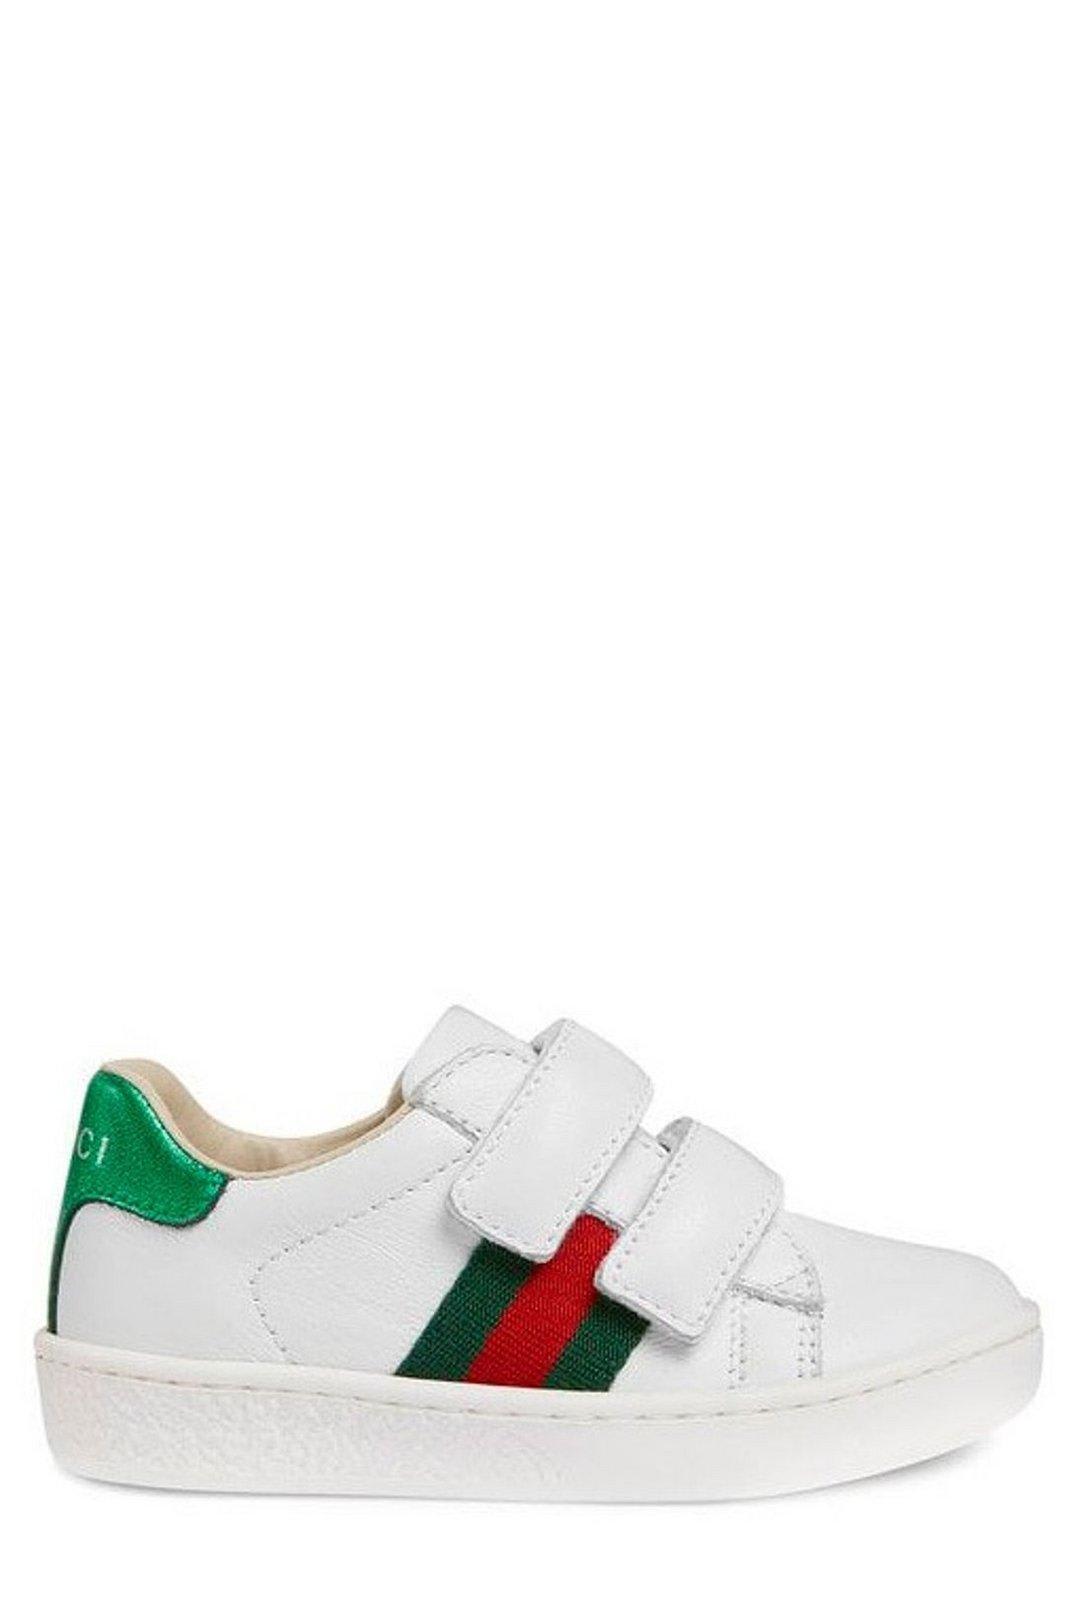 Gucci Stripe Detailed New Ace Touch-strap Sneakers